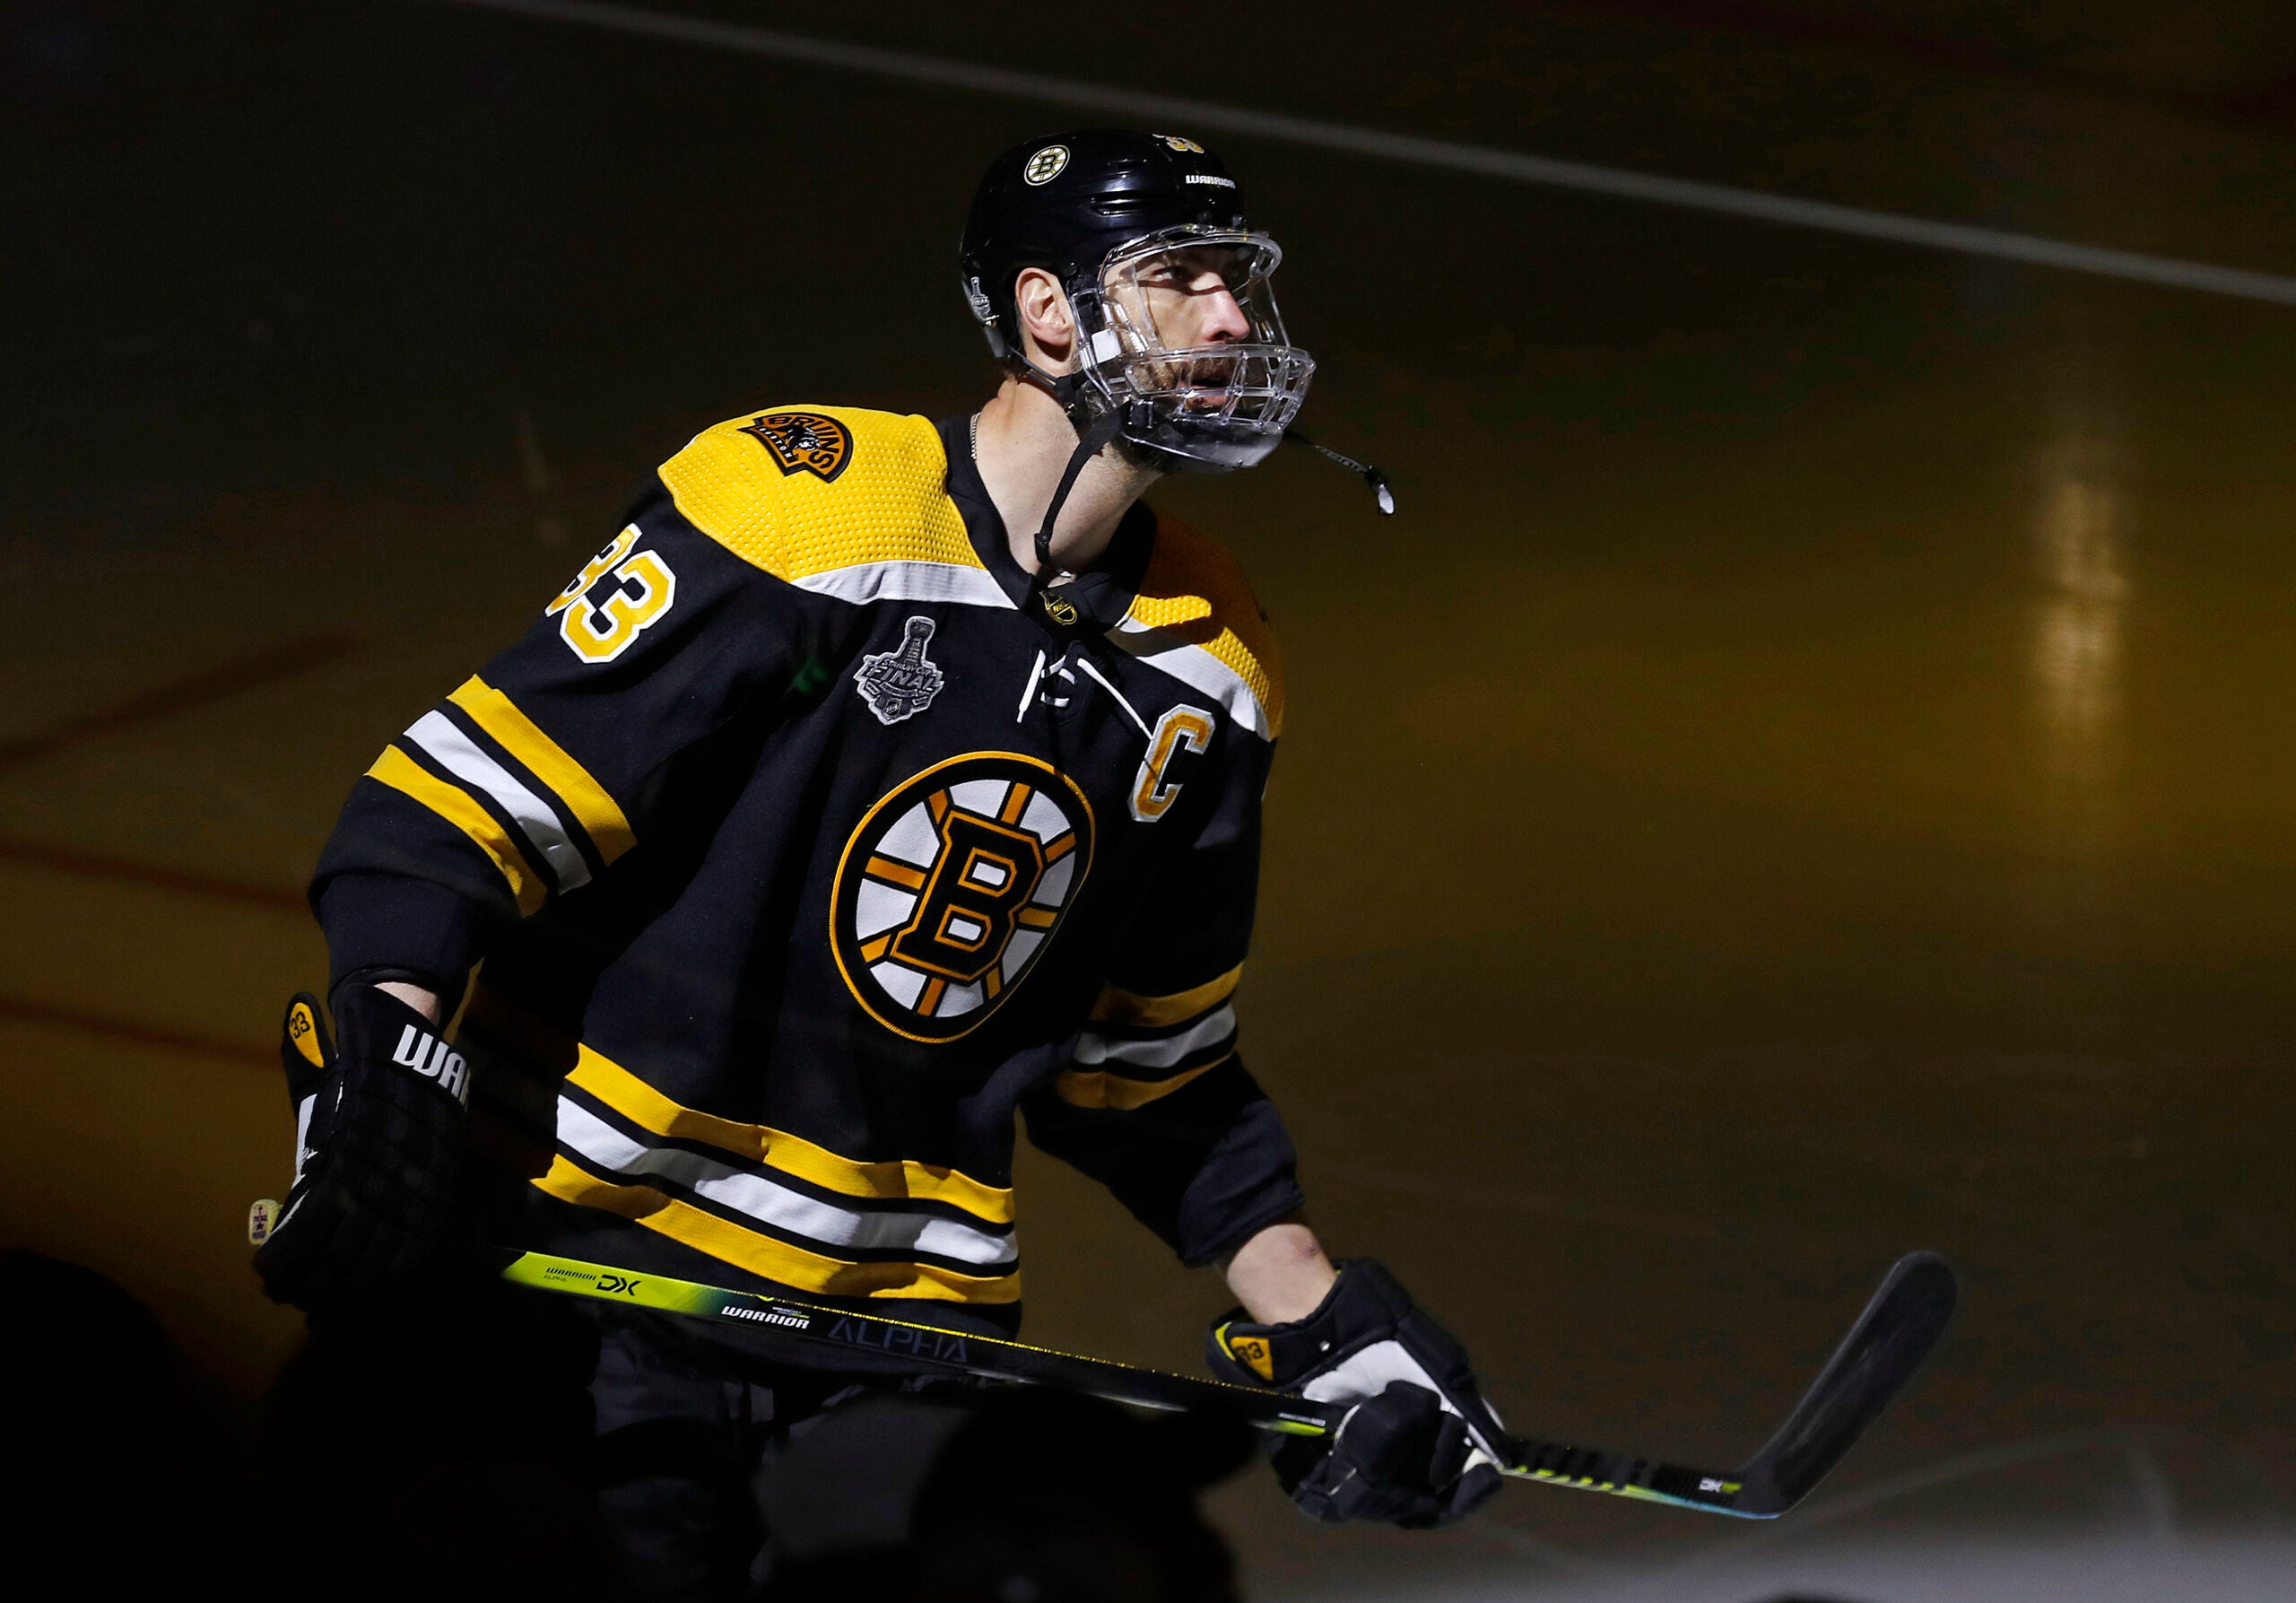 Bruins captain Zdeno Chara is pictured on the ice during pre game warmups. The Boston Bruins host the St. Louis Blues in Game 5 of the 2019 Stanley Cup Final at TD Garden.